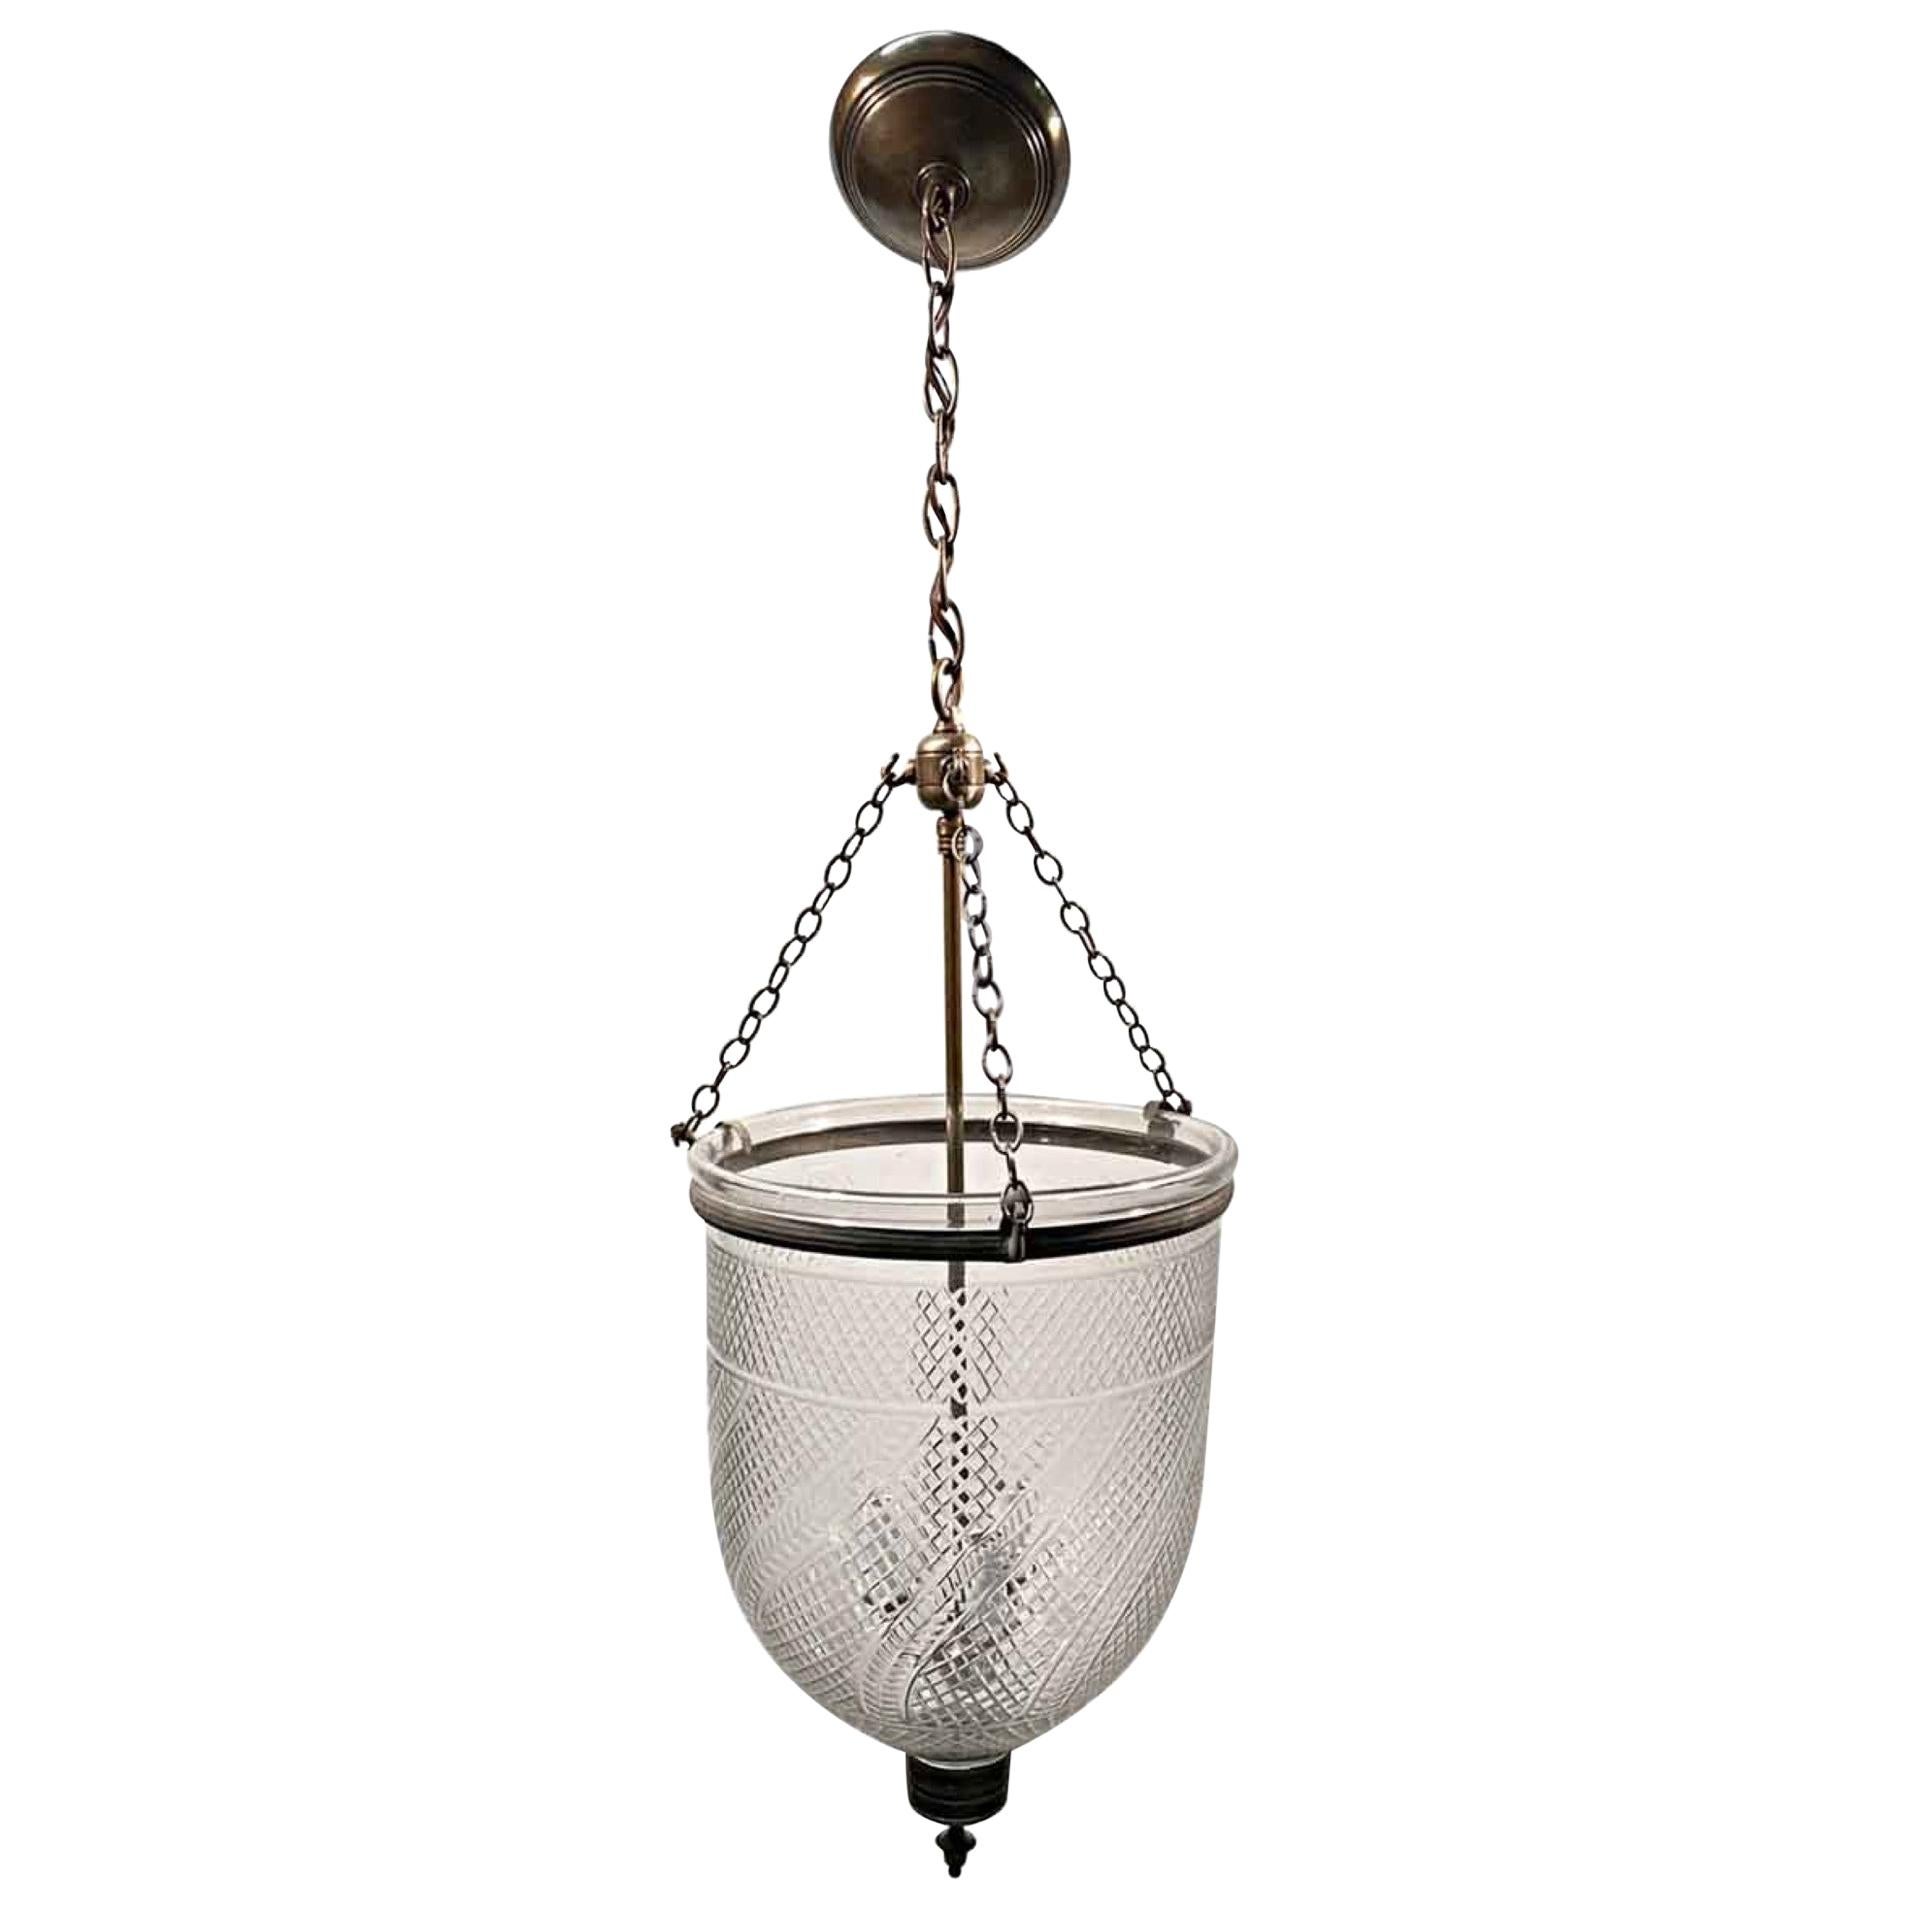 1940s English Clear Bell Jar Pendant Lantern with Etched Decorative Details